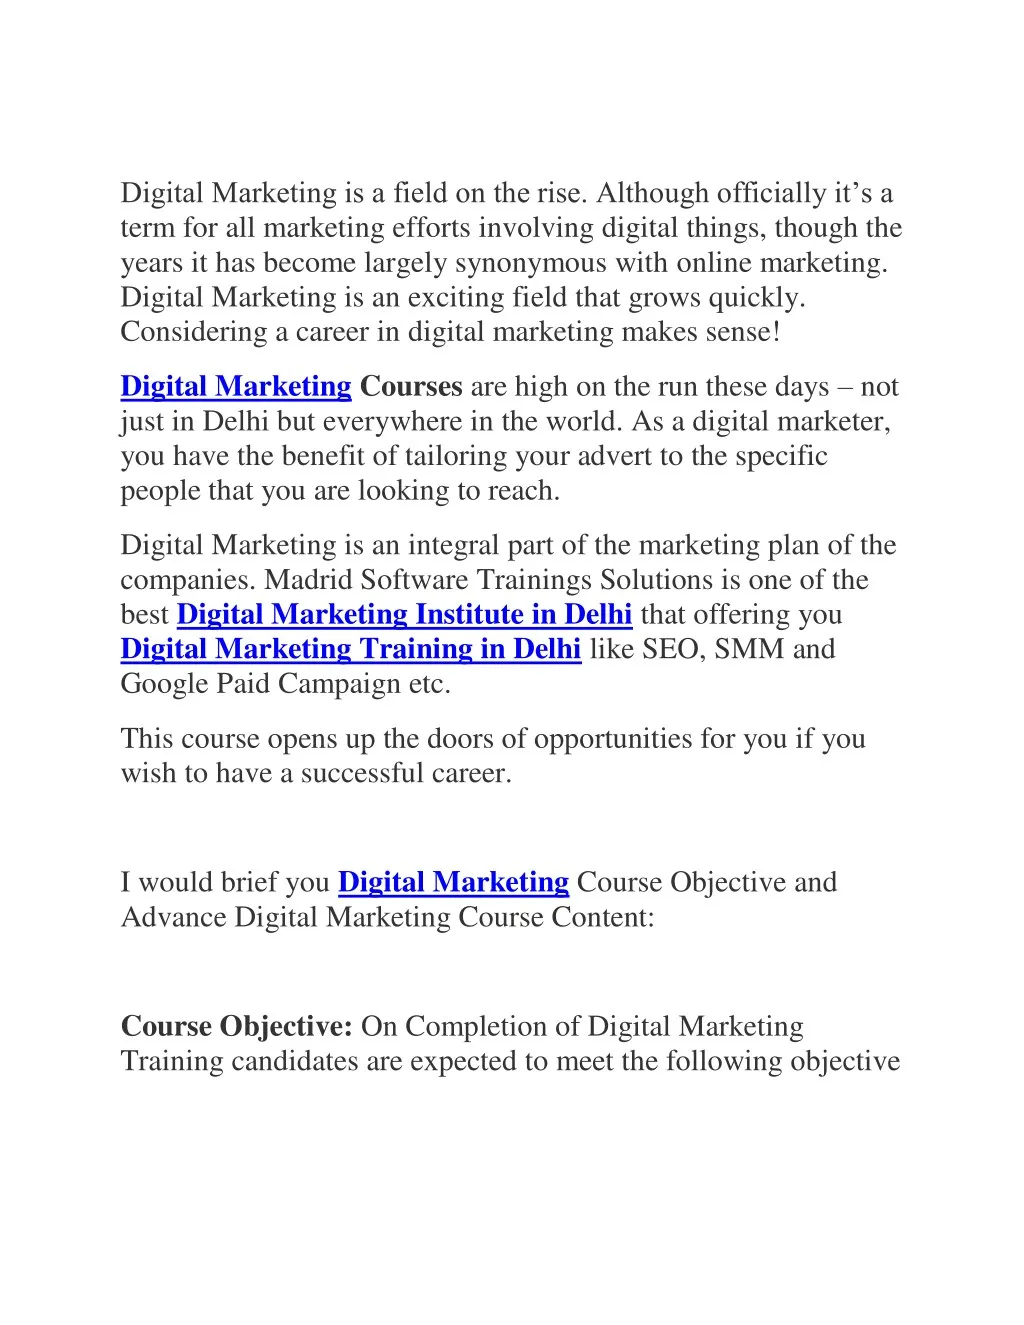 digital marketing is a field on the rise although